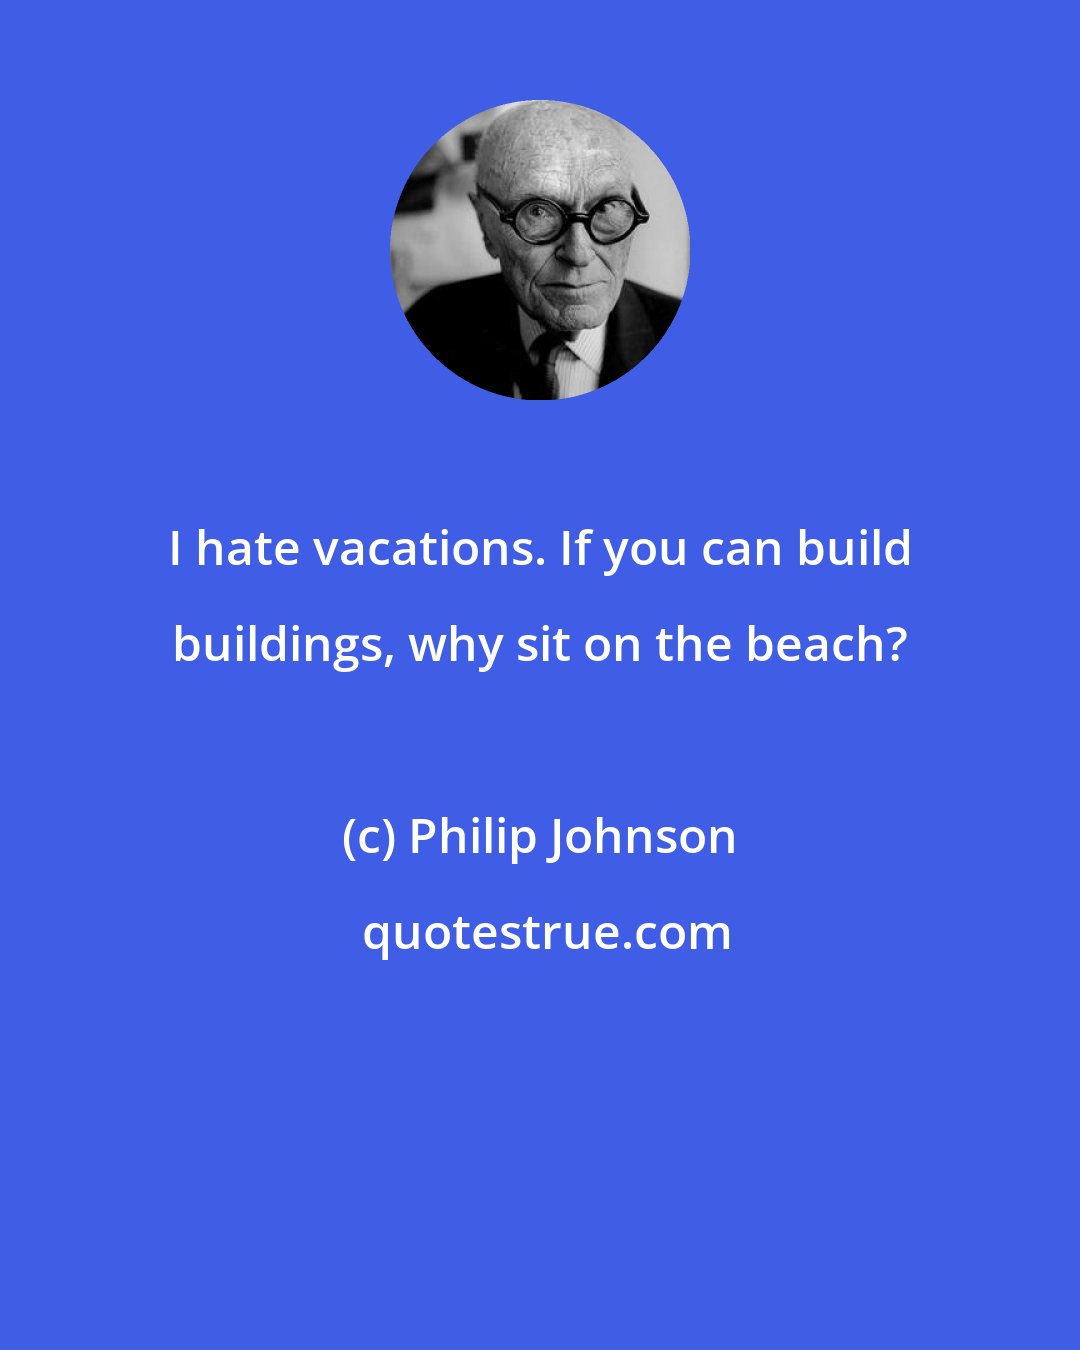 Philip Johnson: I hate vacations. If you can build buildings, why sit on the beach?